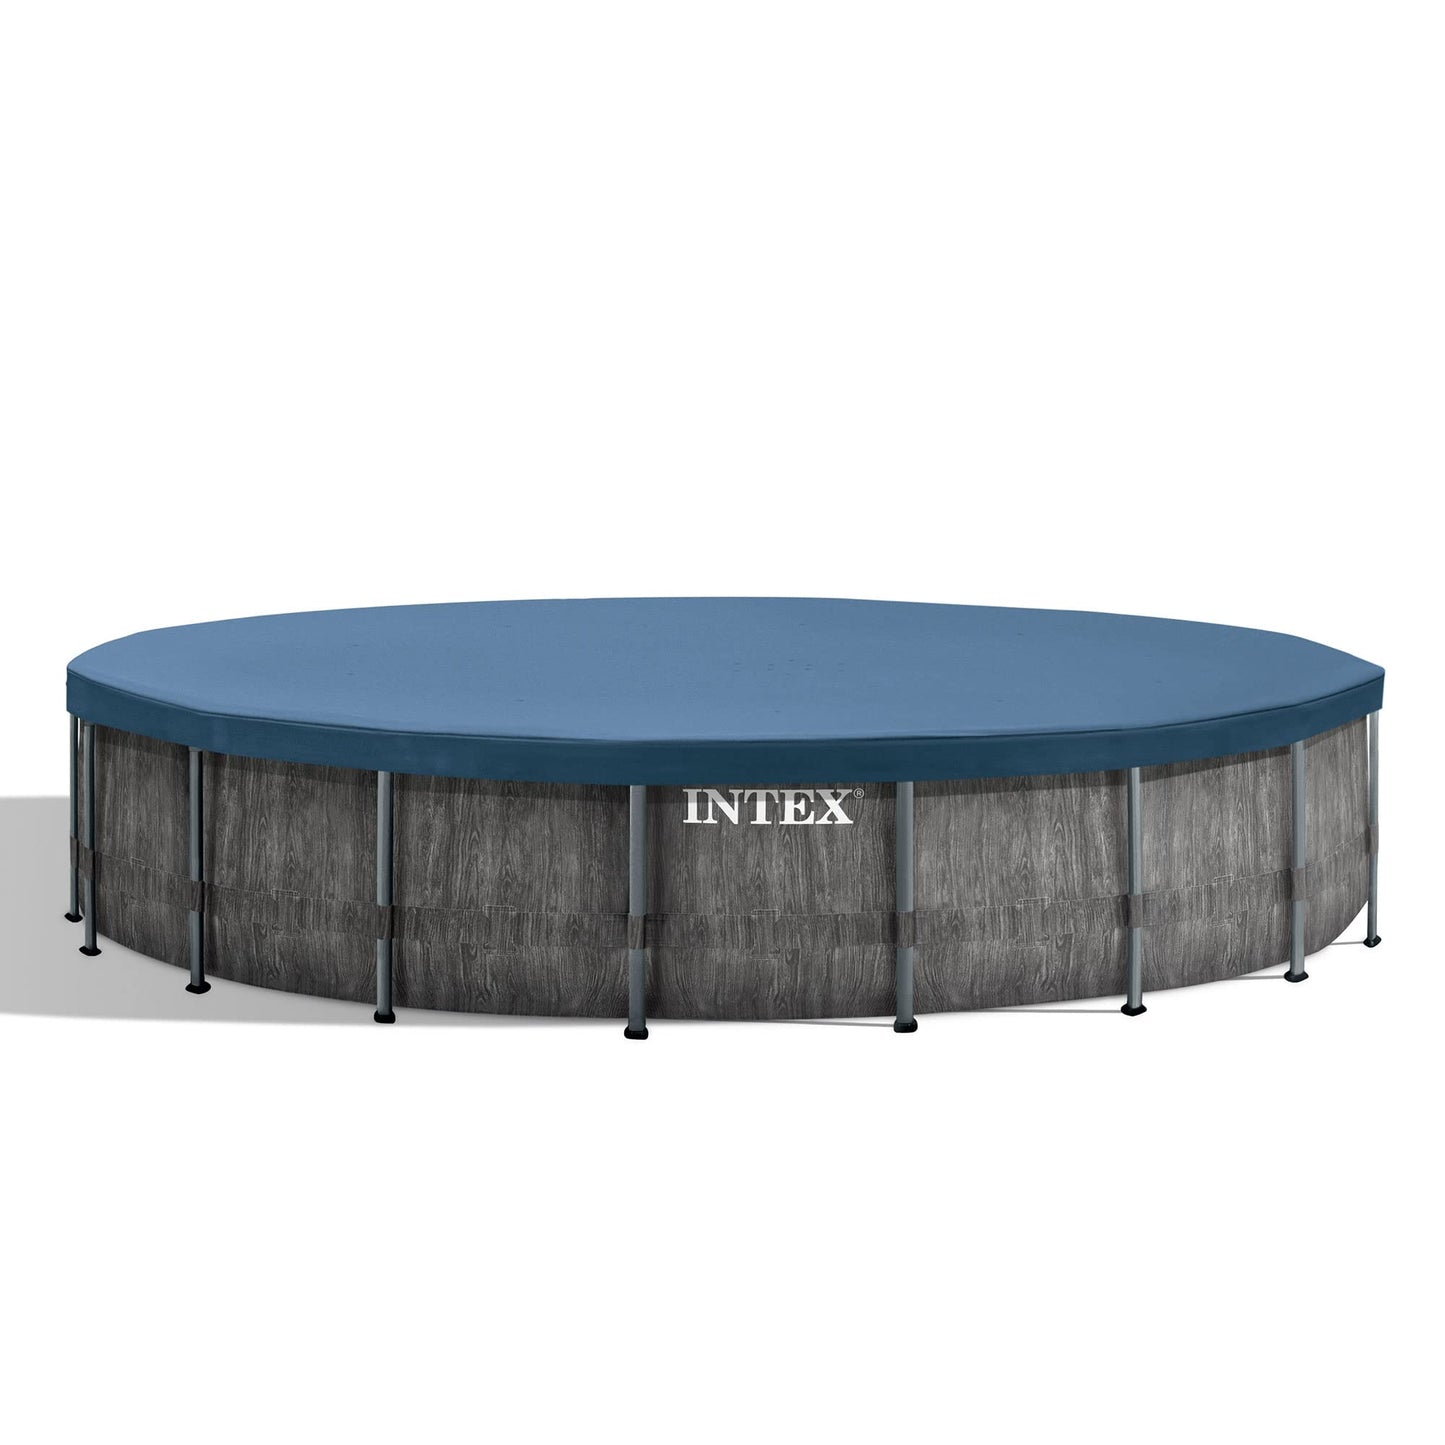 Intex Greywood Prism Frame 18' x 48" Round Above Ground Outdoor Swimming Pool Set with 1500 GPH Filter Pump, Ladder, Ground Cloth, and Pool Cover 18 feet